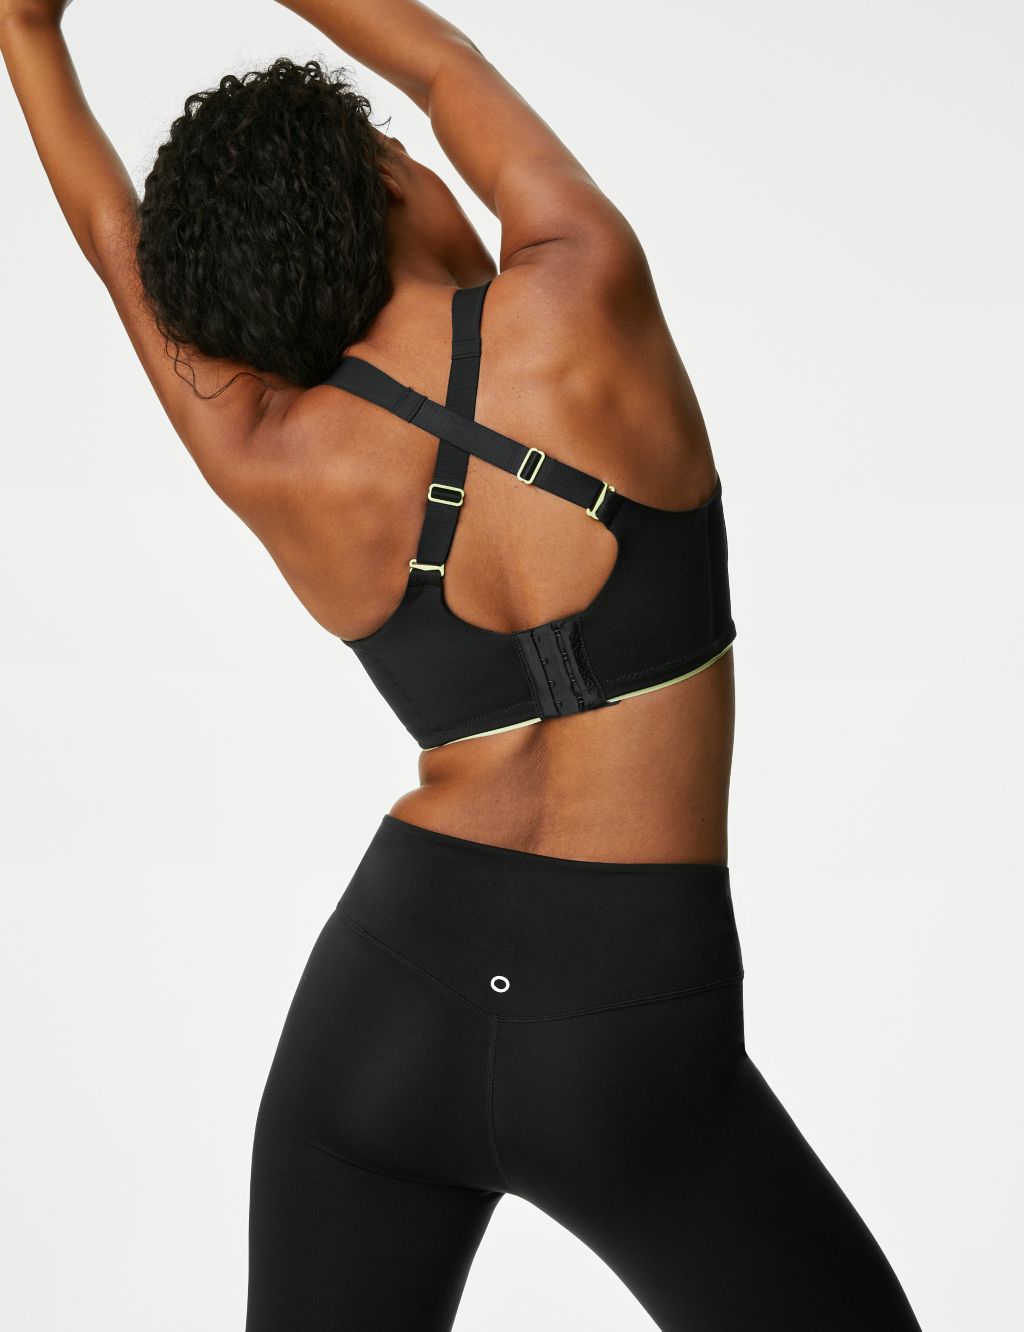 Ultimate Support Serious Sports™ Bra F-H image 4